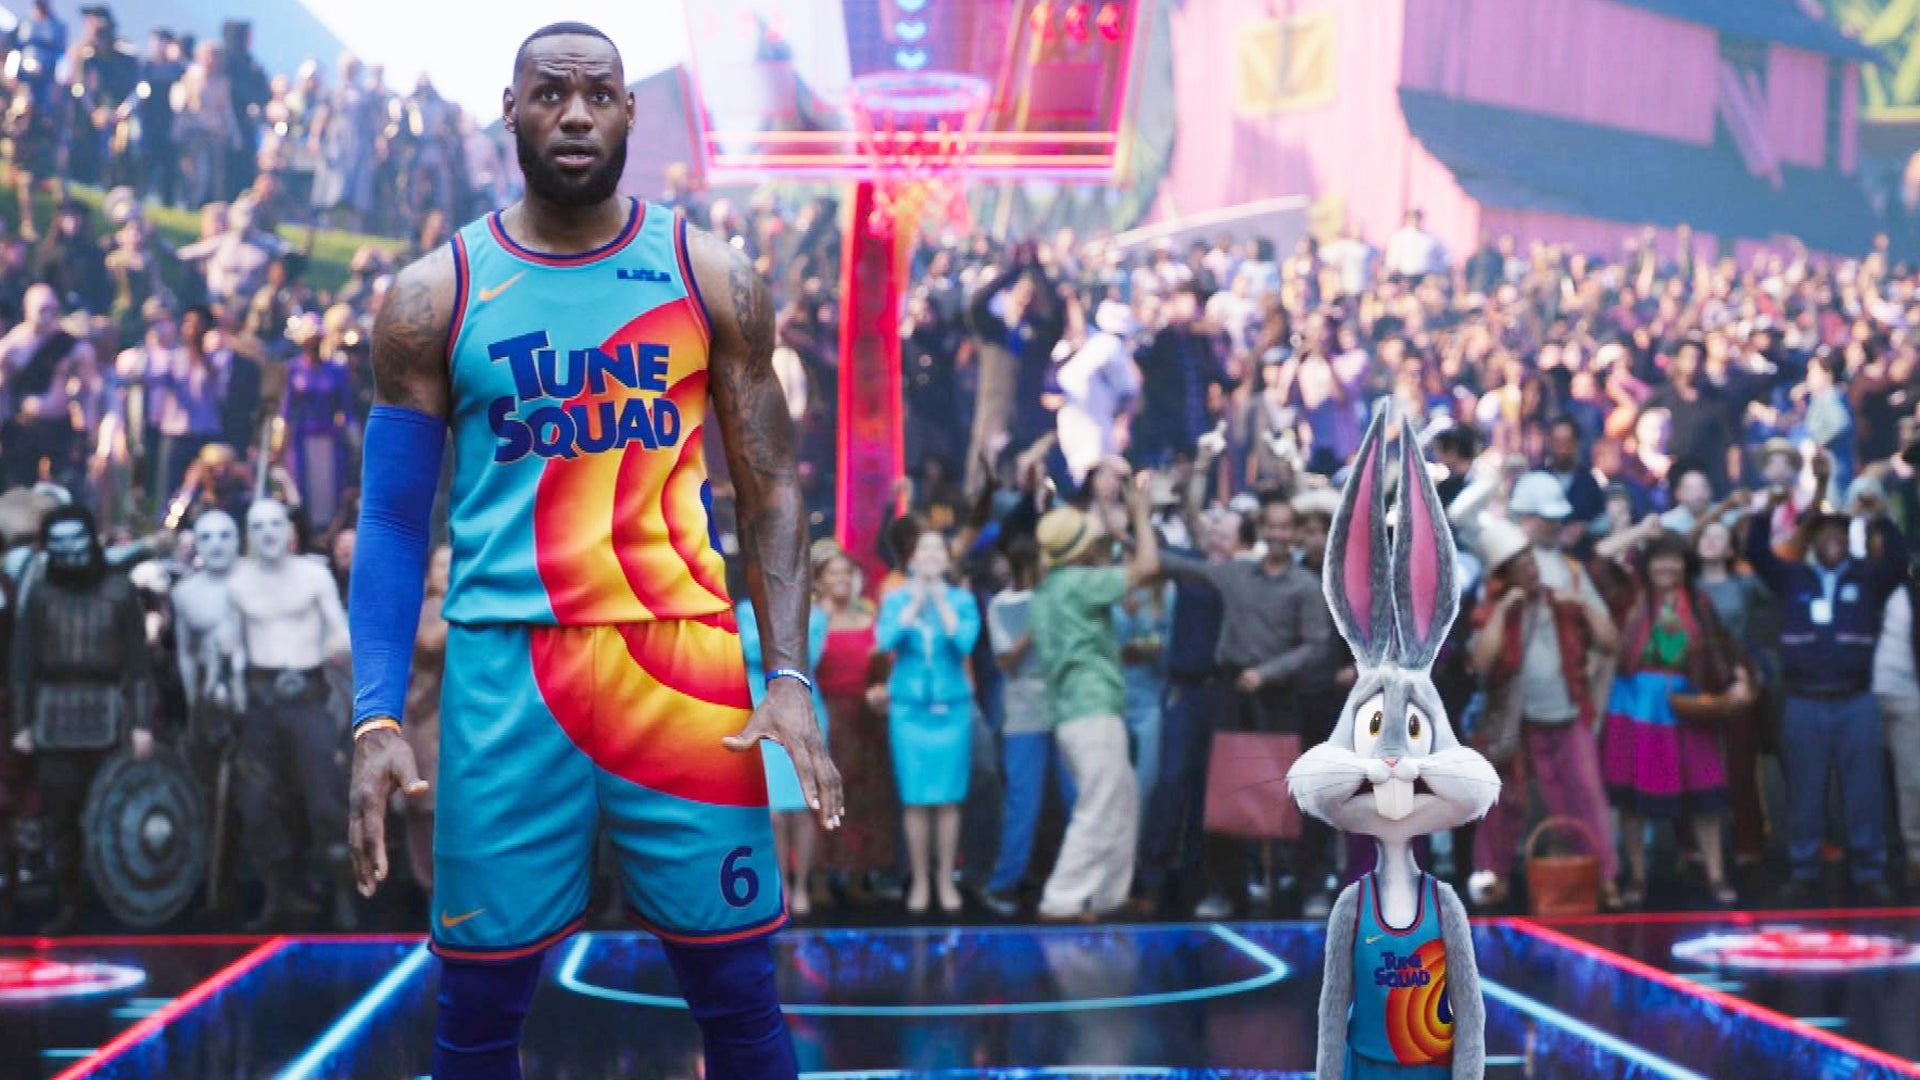 New 'Space Jam 2' Trailer Shows LeBron James and the Toon Squad on the Court